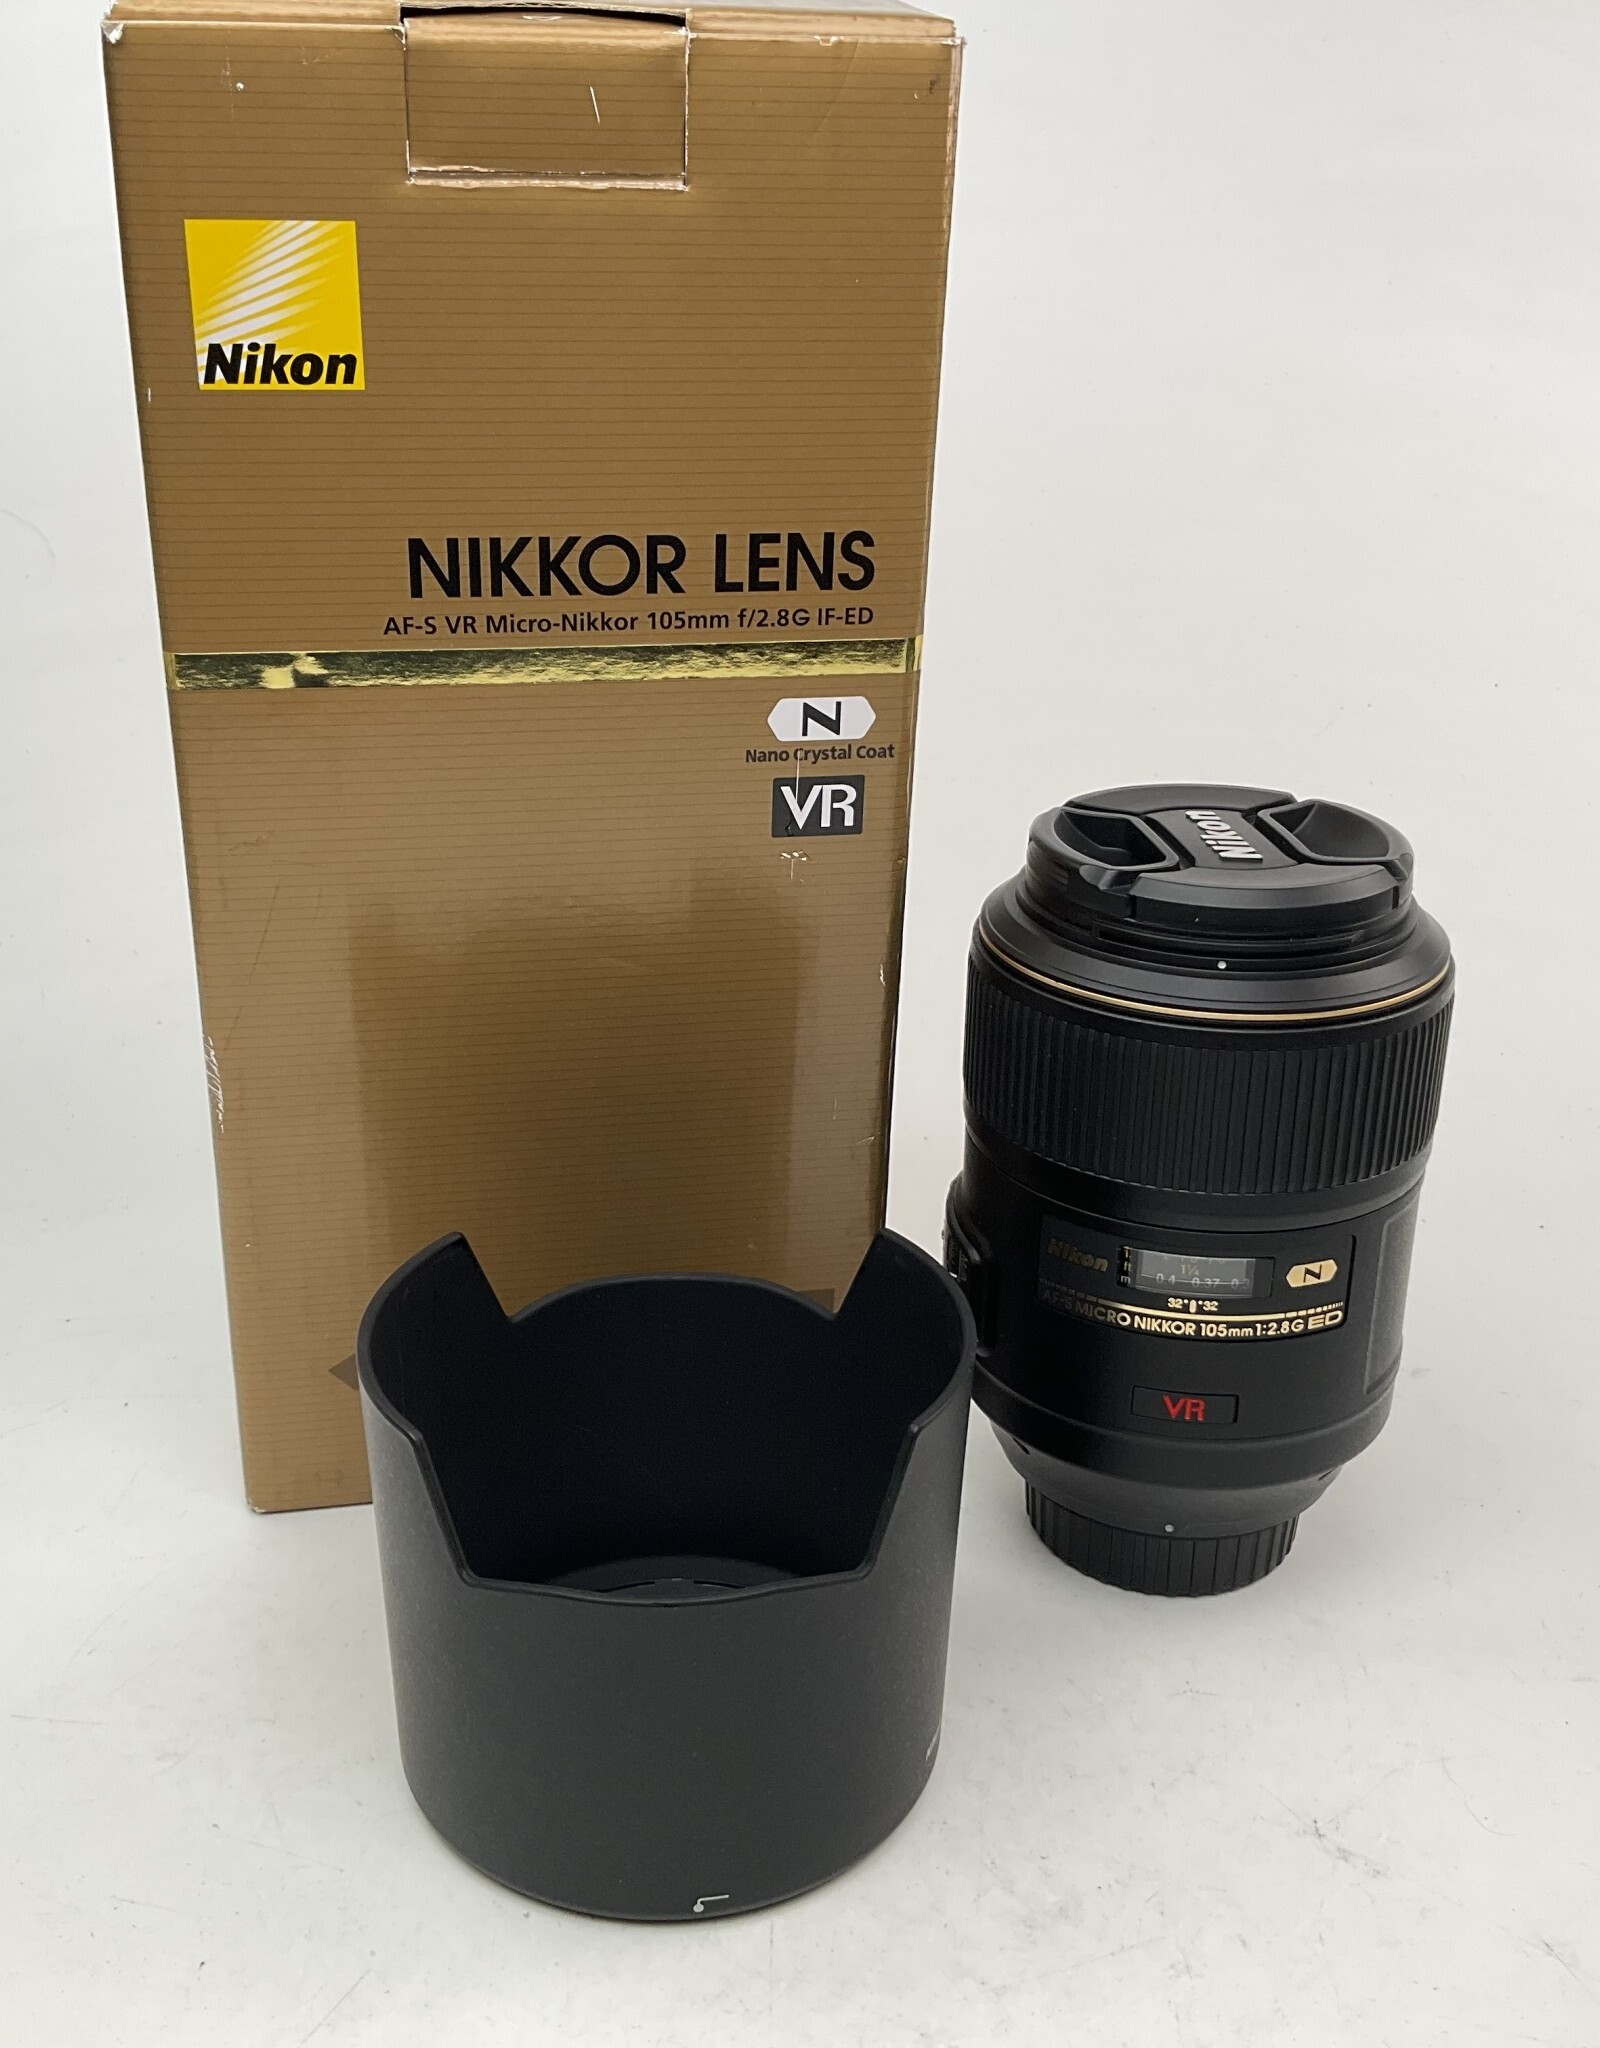 CANON Nikon AF-S Micro Nikkor 105mm f2.8G VR Lens in Box Used EX